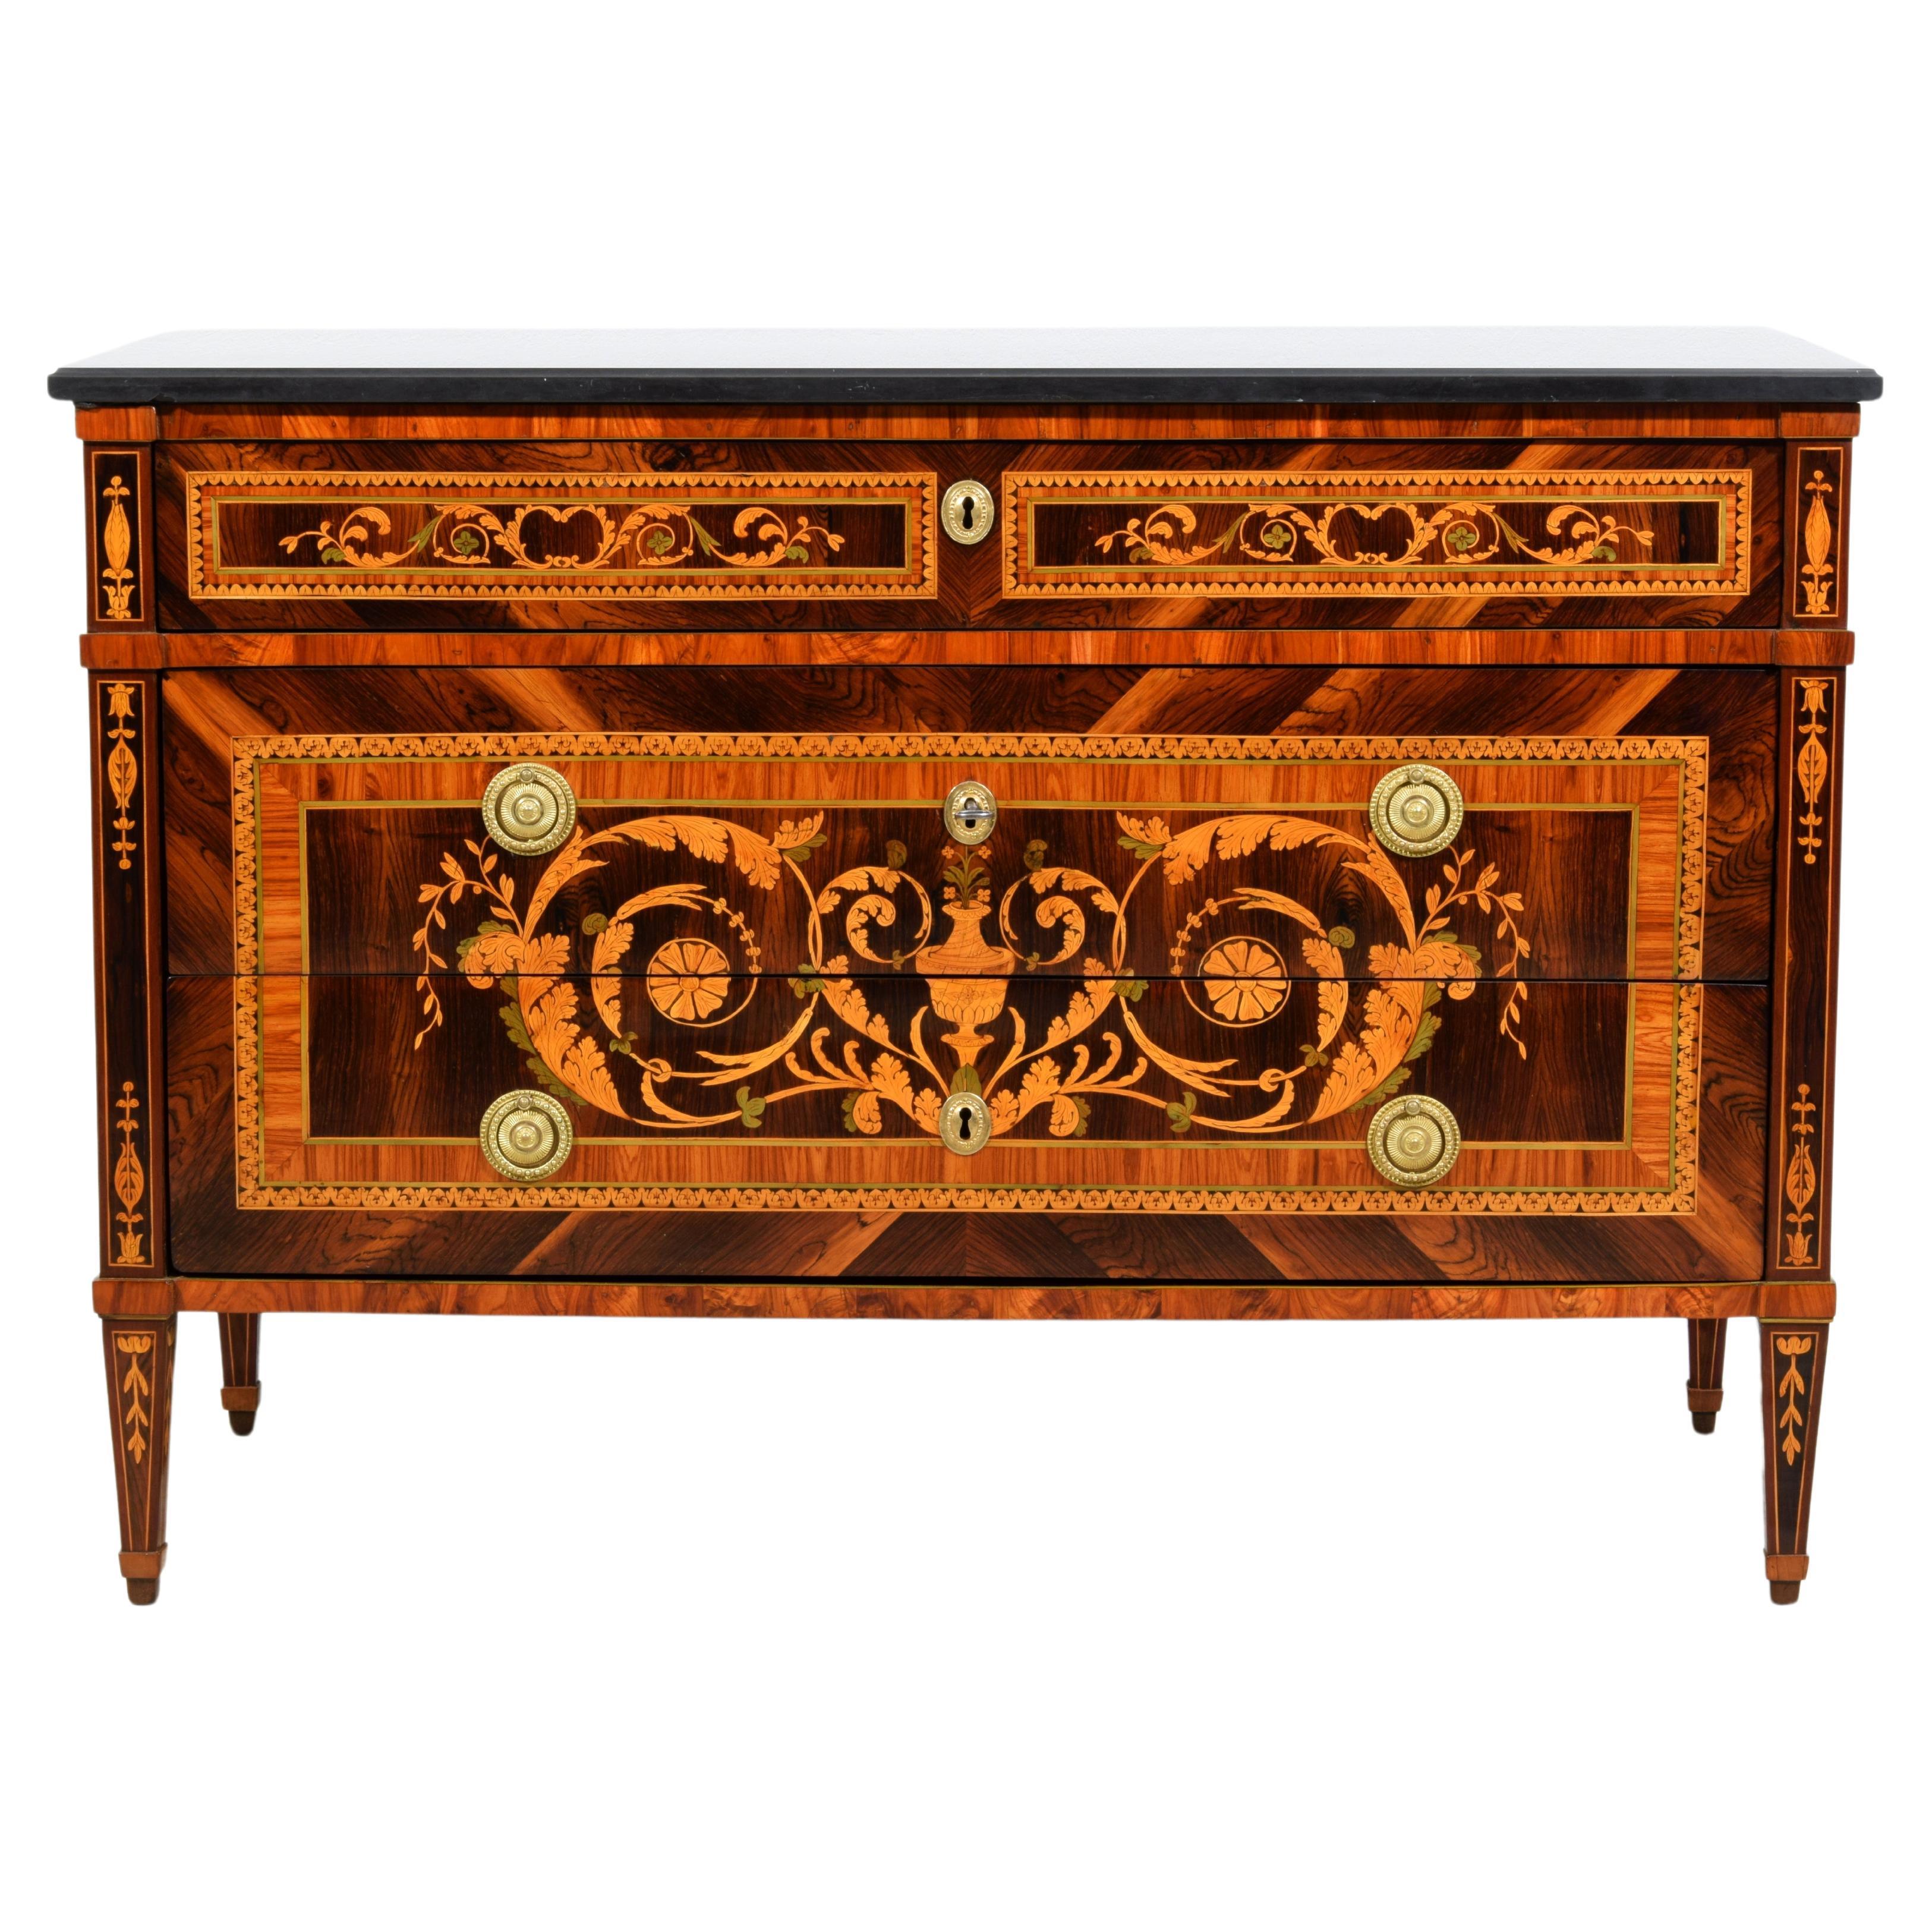 18th Century, Italian Neoclassical Inlaid Chest of Drawers with Marble